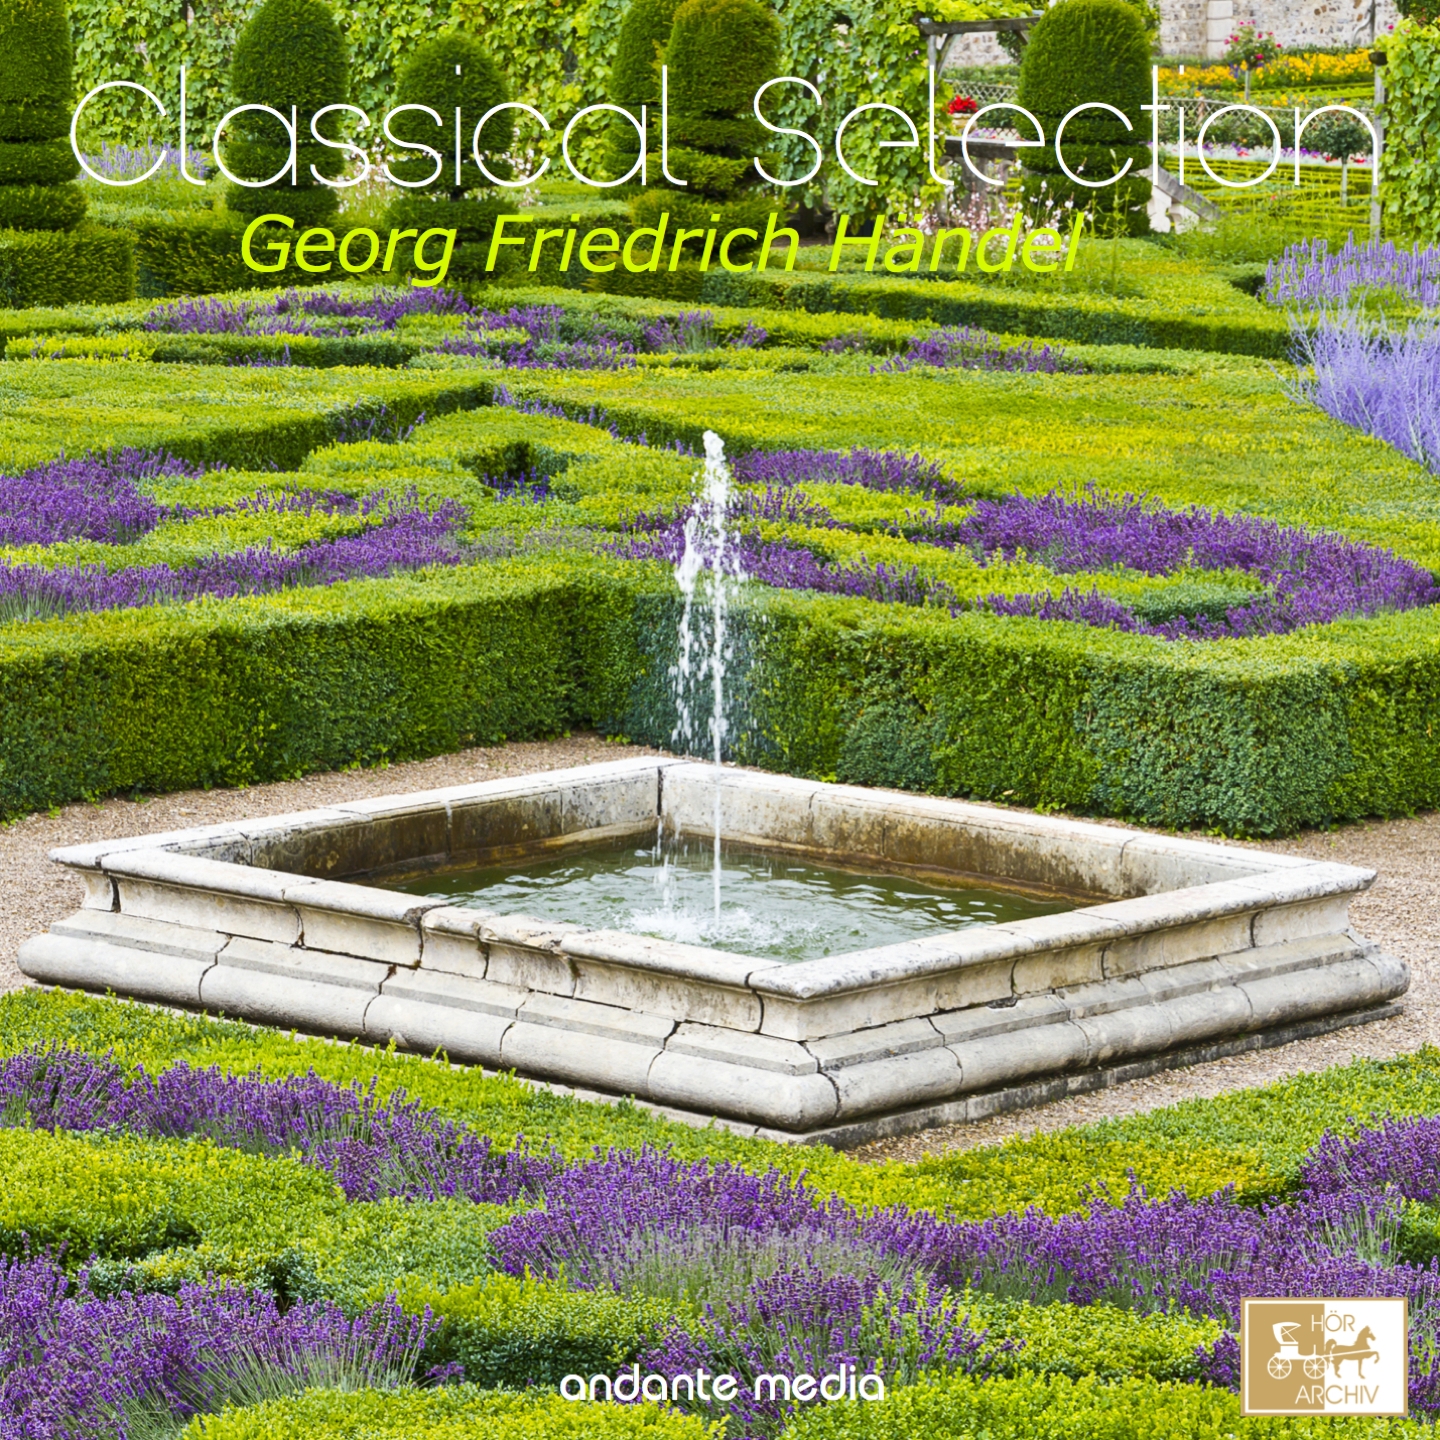 Water Music Suite No. 2 in D Major, HWV 349: Boure e